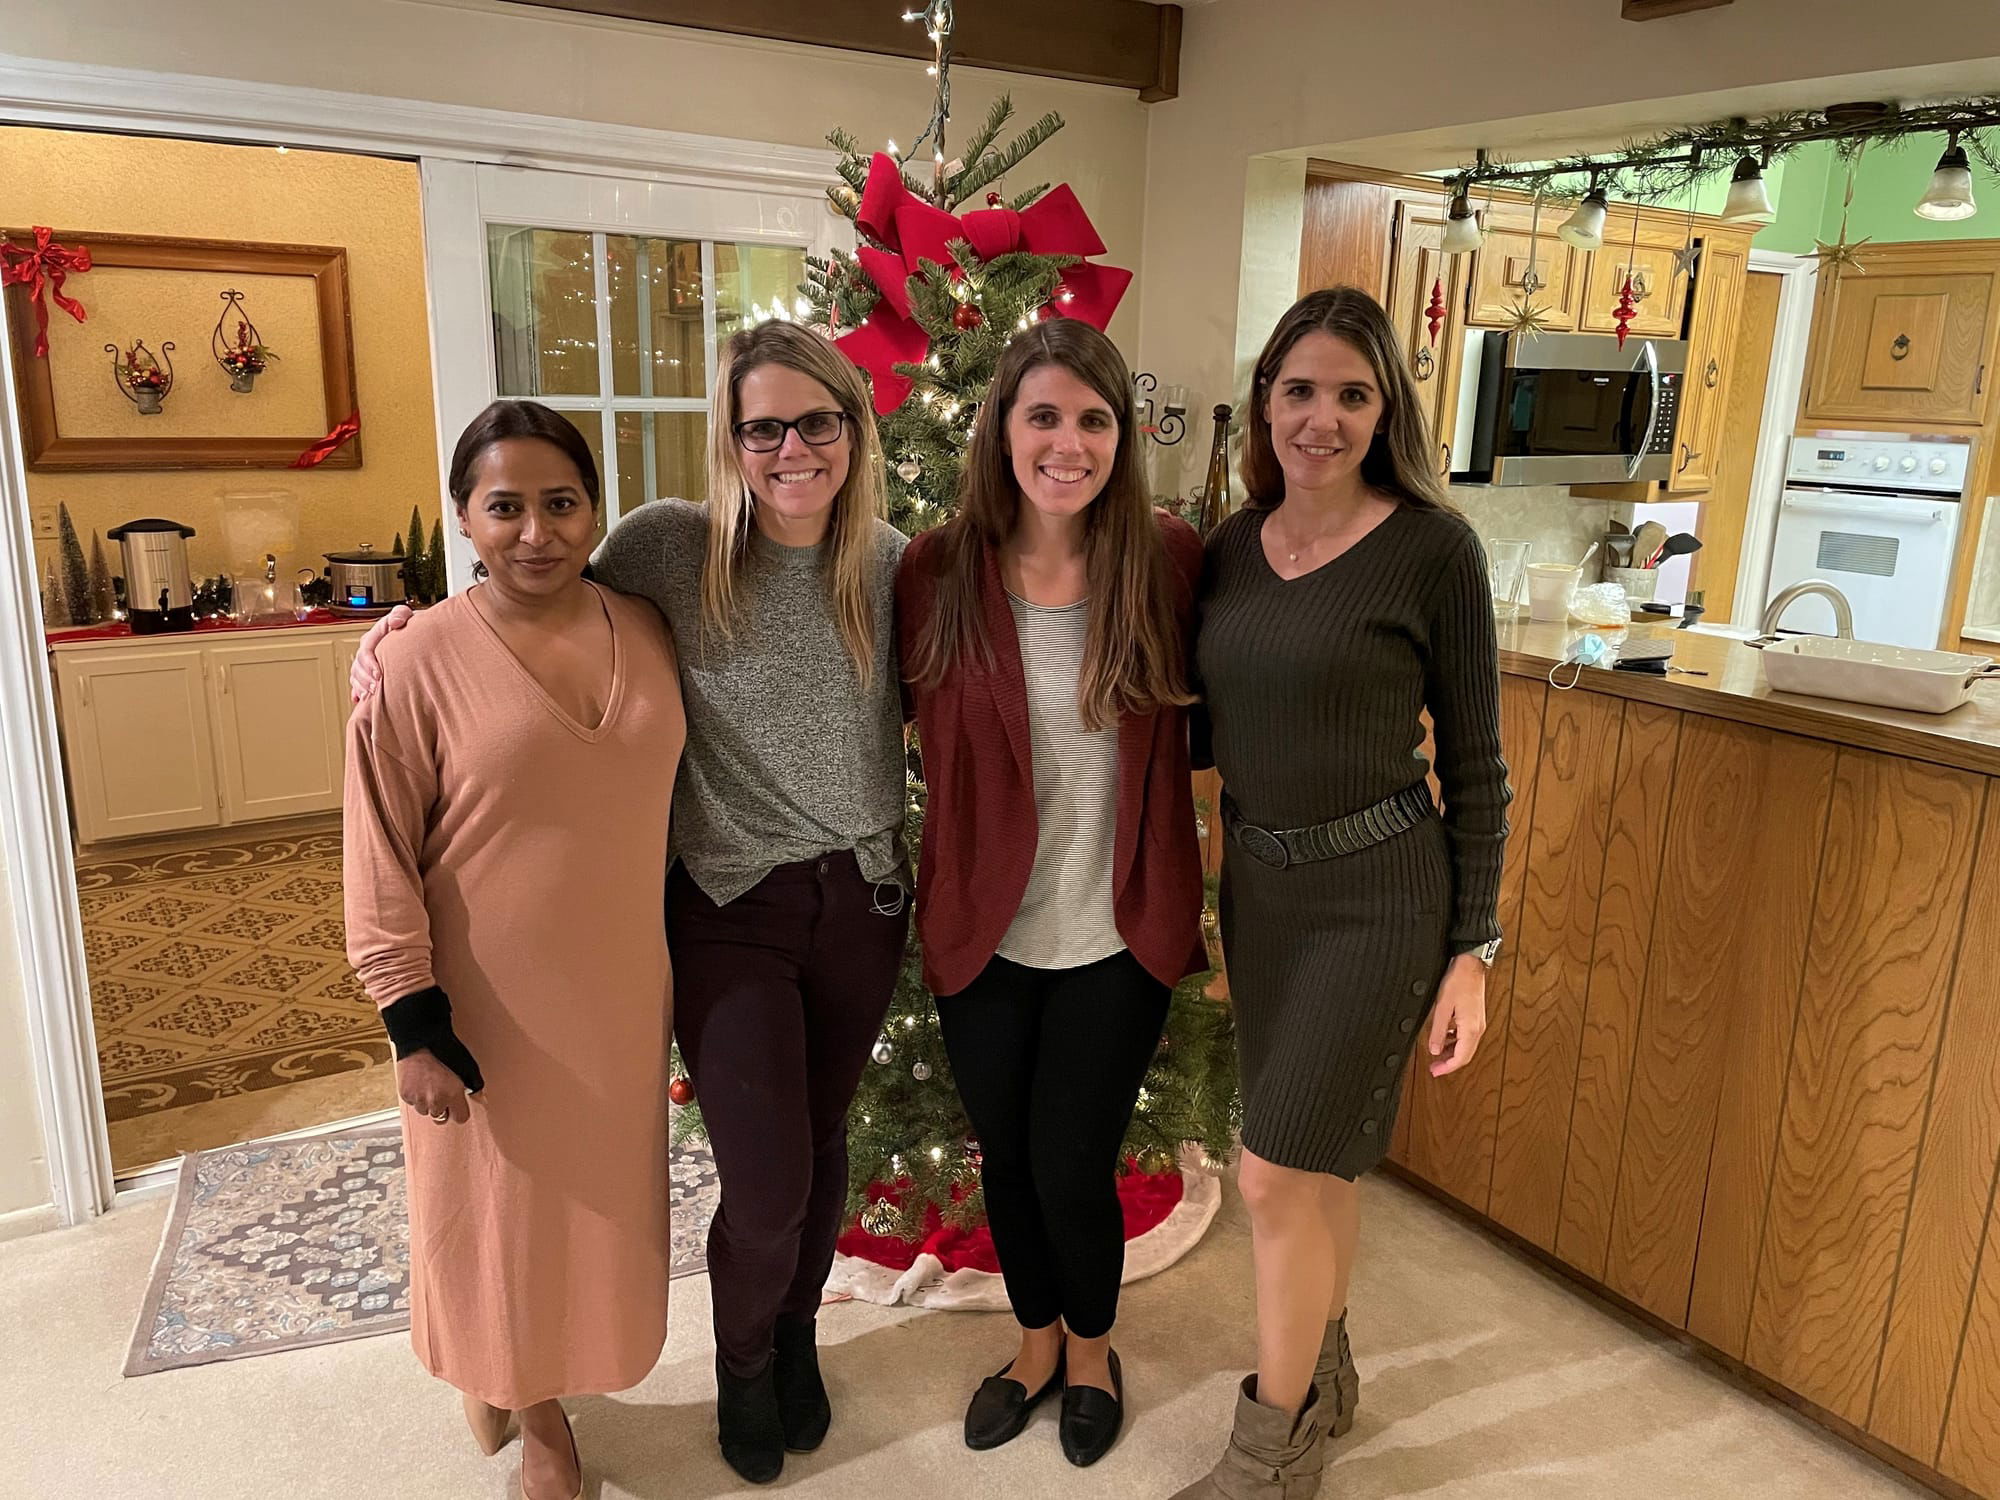 LLU Child Faculty at the annual Child Research Holiday Party 2021